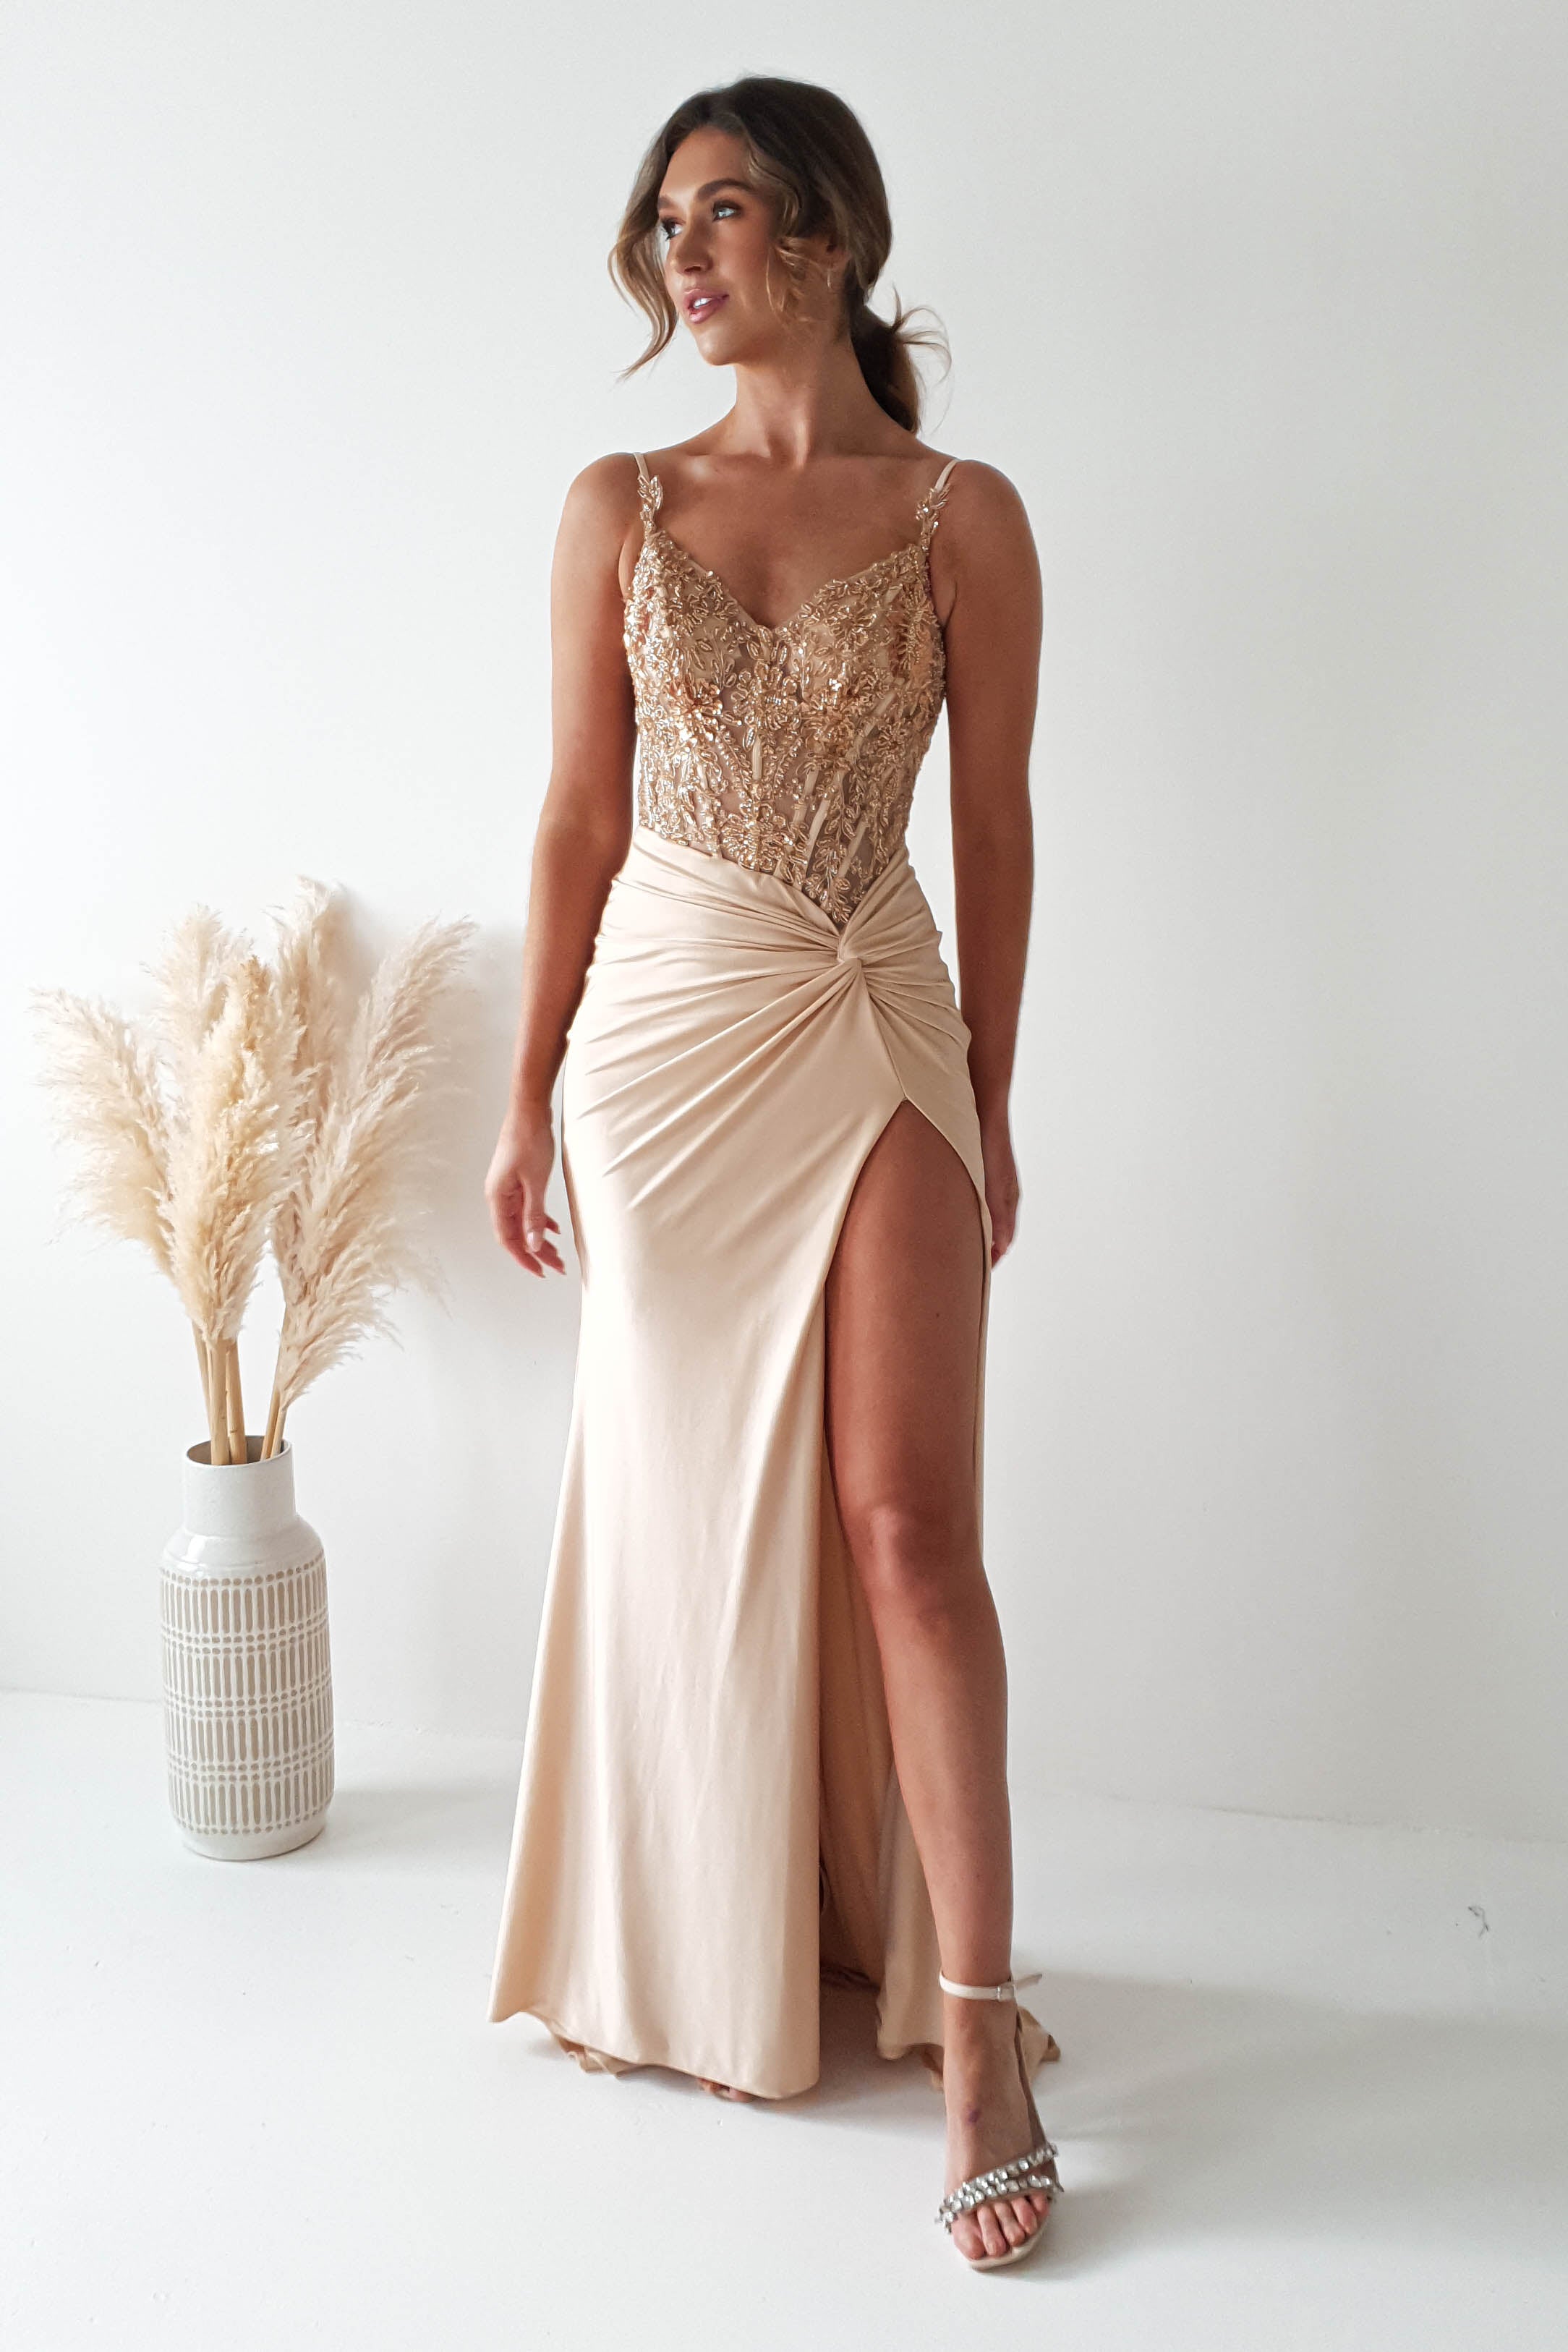 sonia-embellished-bodycon-gown-gold-dresses-52473101746517.jpg